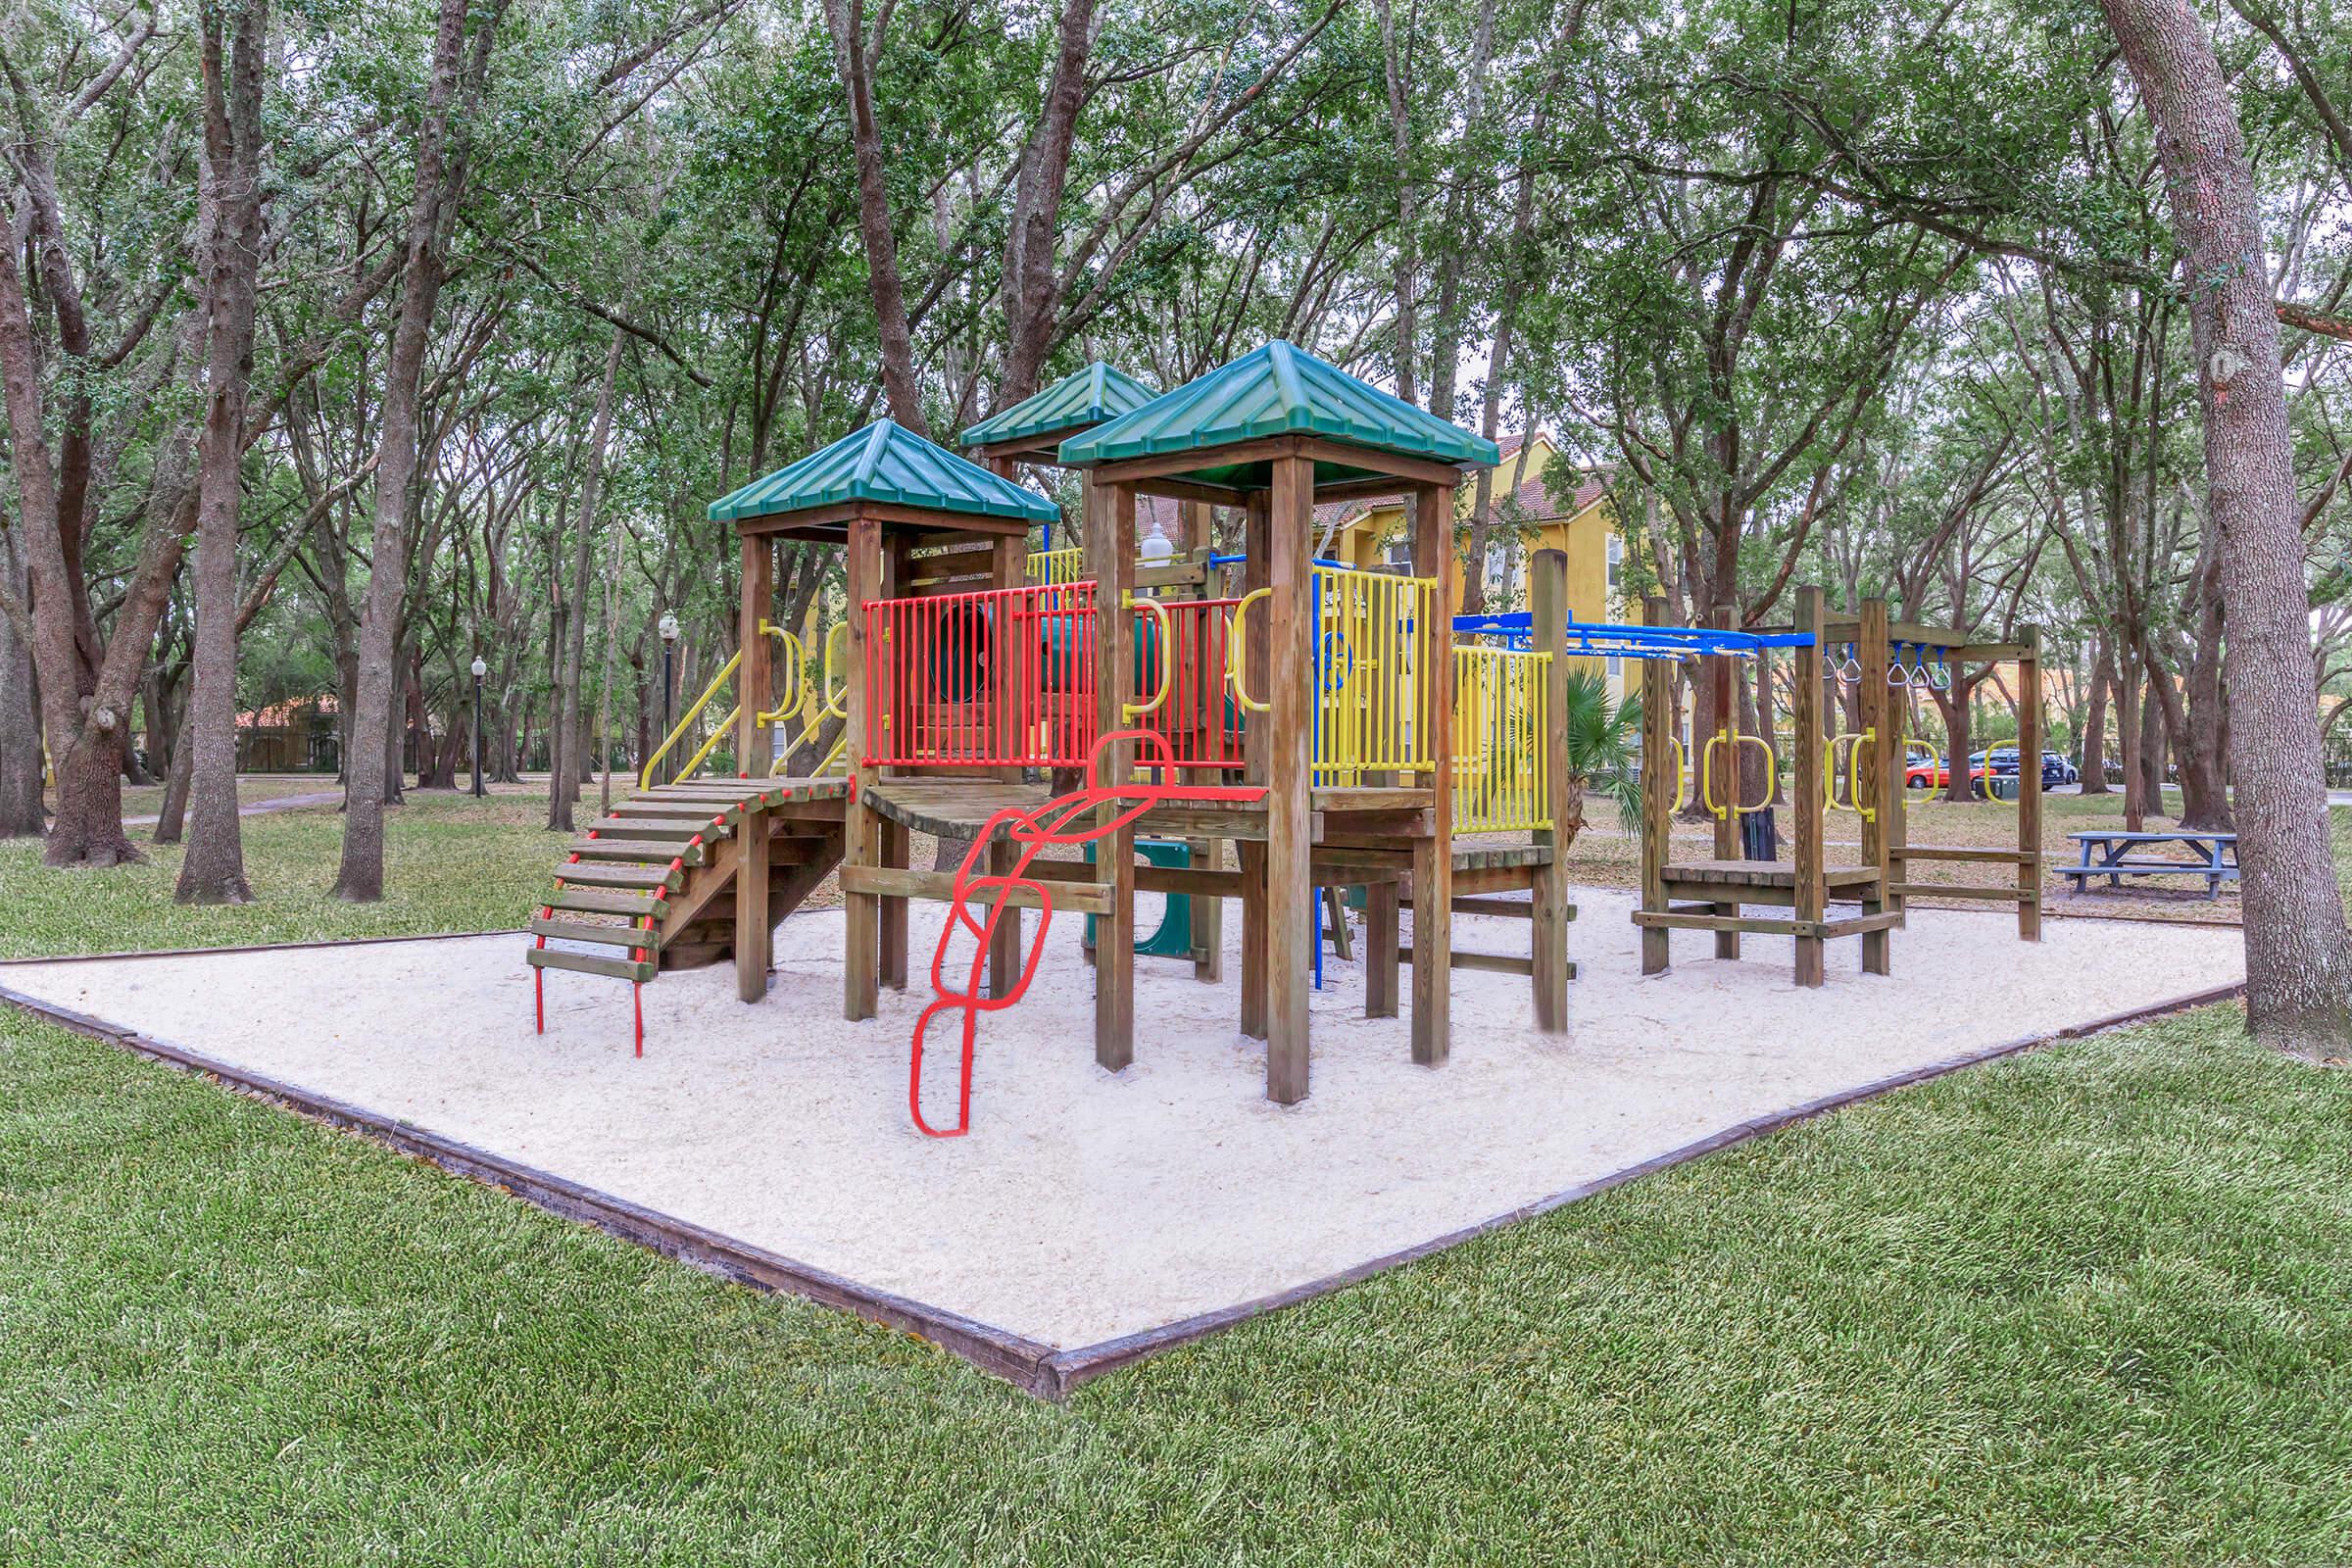 View amenities like our playground at Images Condominiums in Kissimmee, Florida